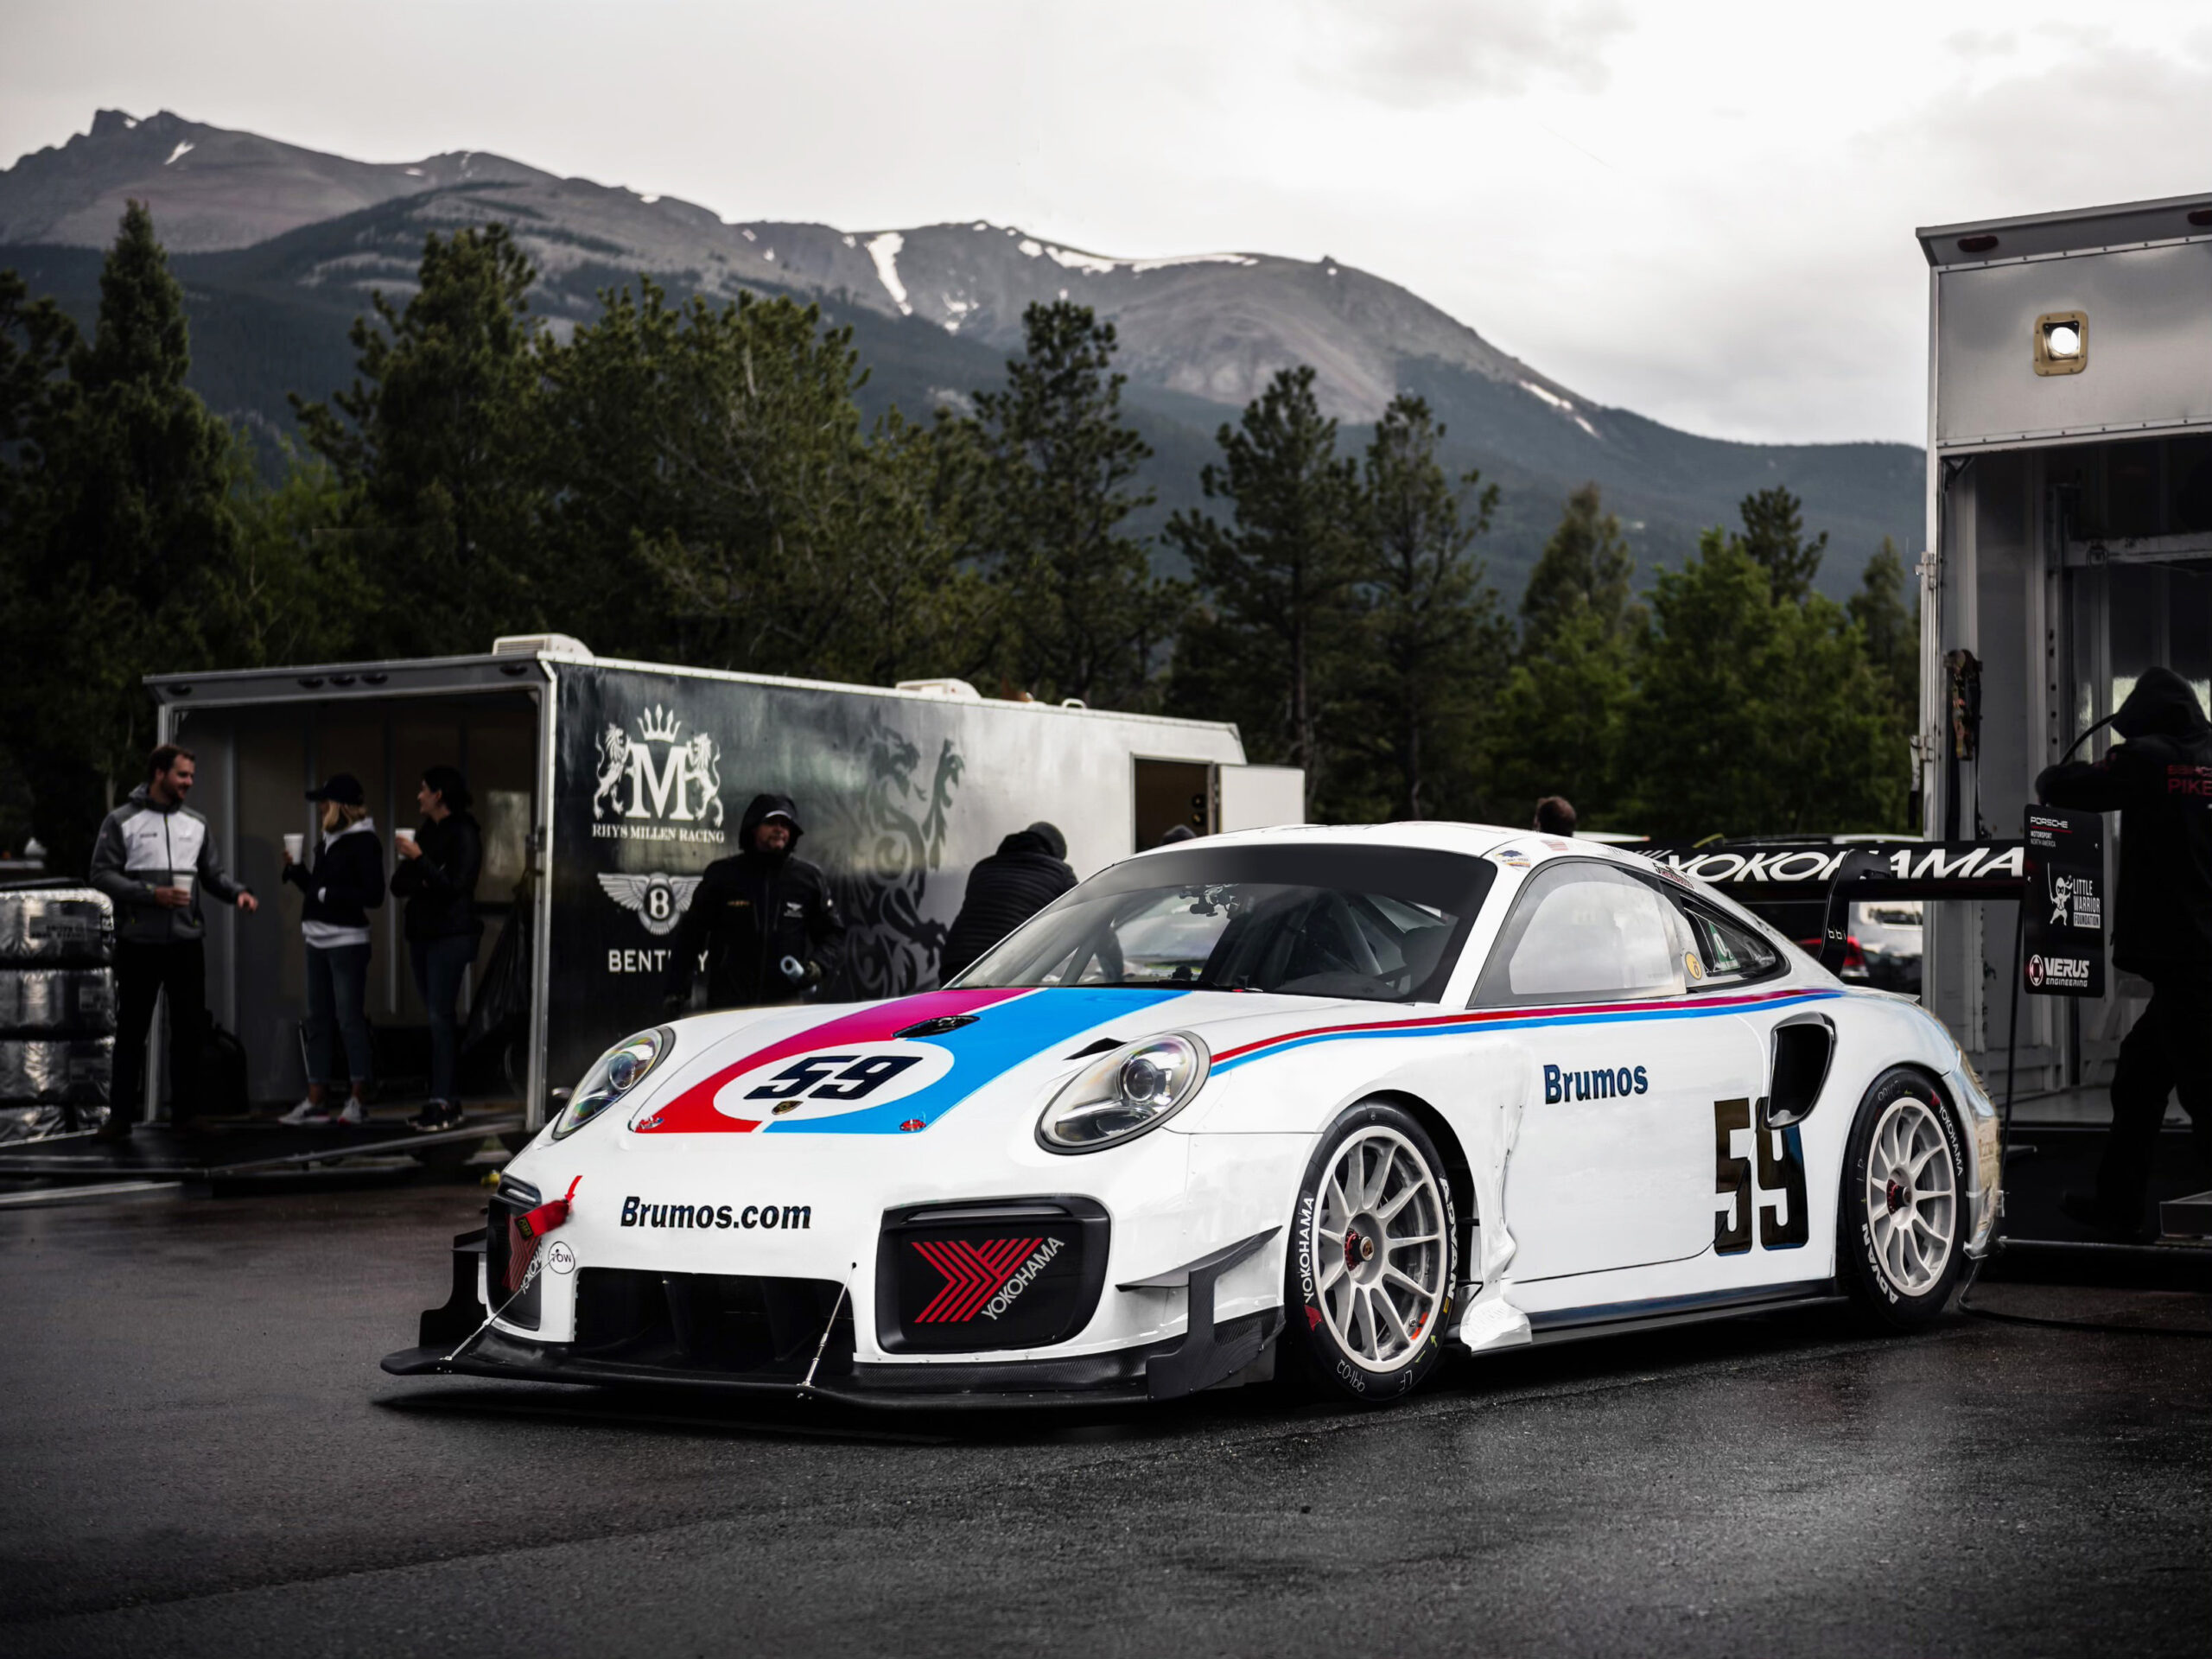 Brumos Porsche race car rolling out of trailer at Pikes Peak